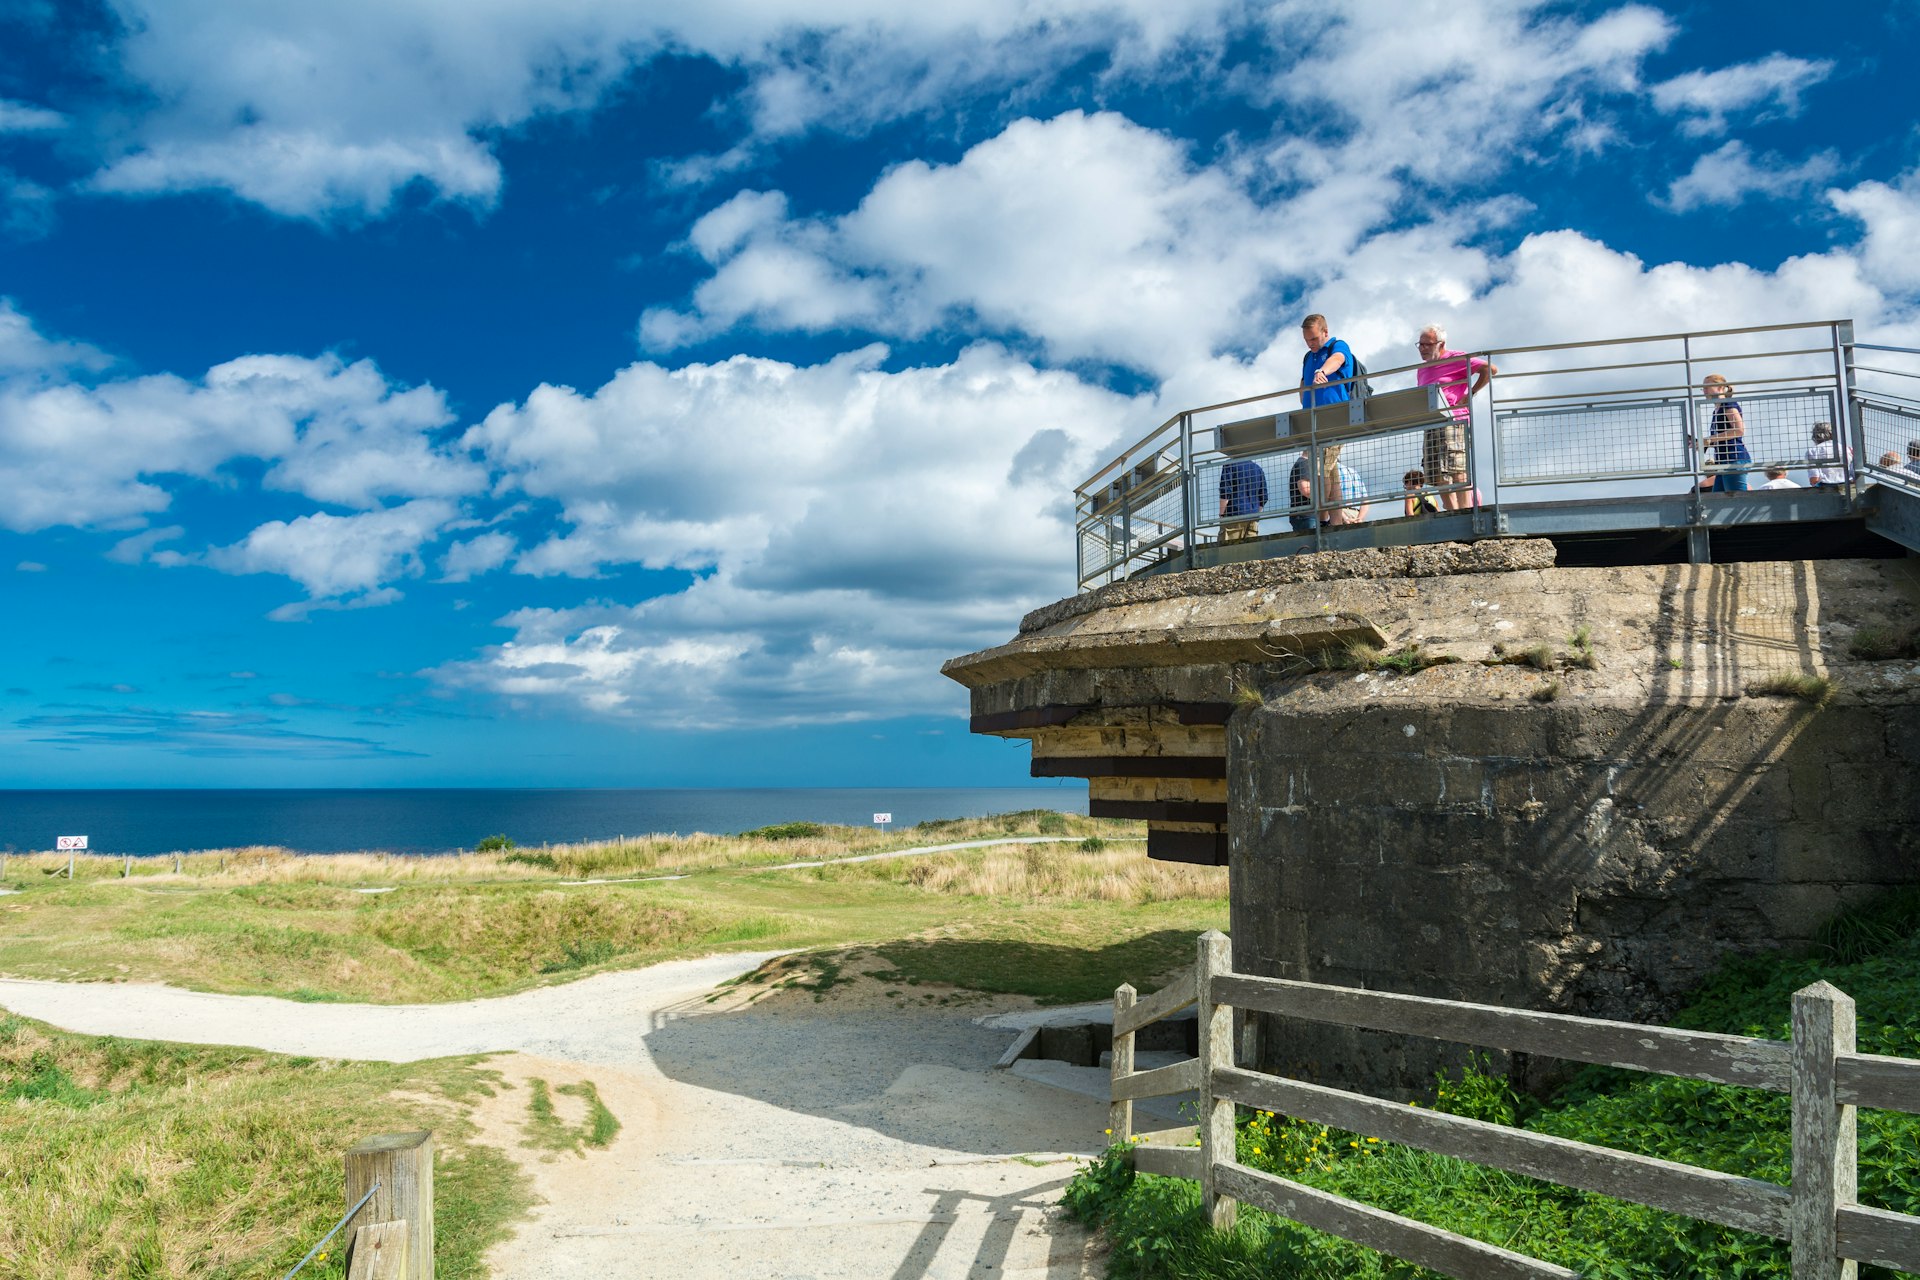 A lookout point at Pointe du Hoc, a historical WWII site in Normandy, France